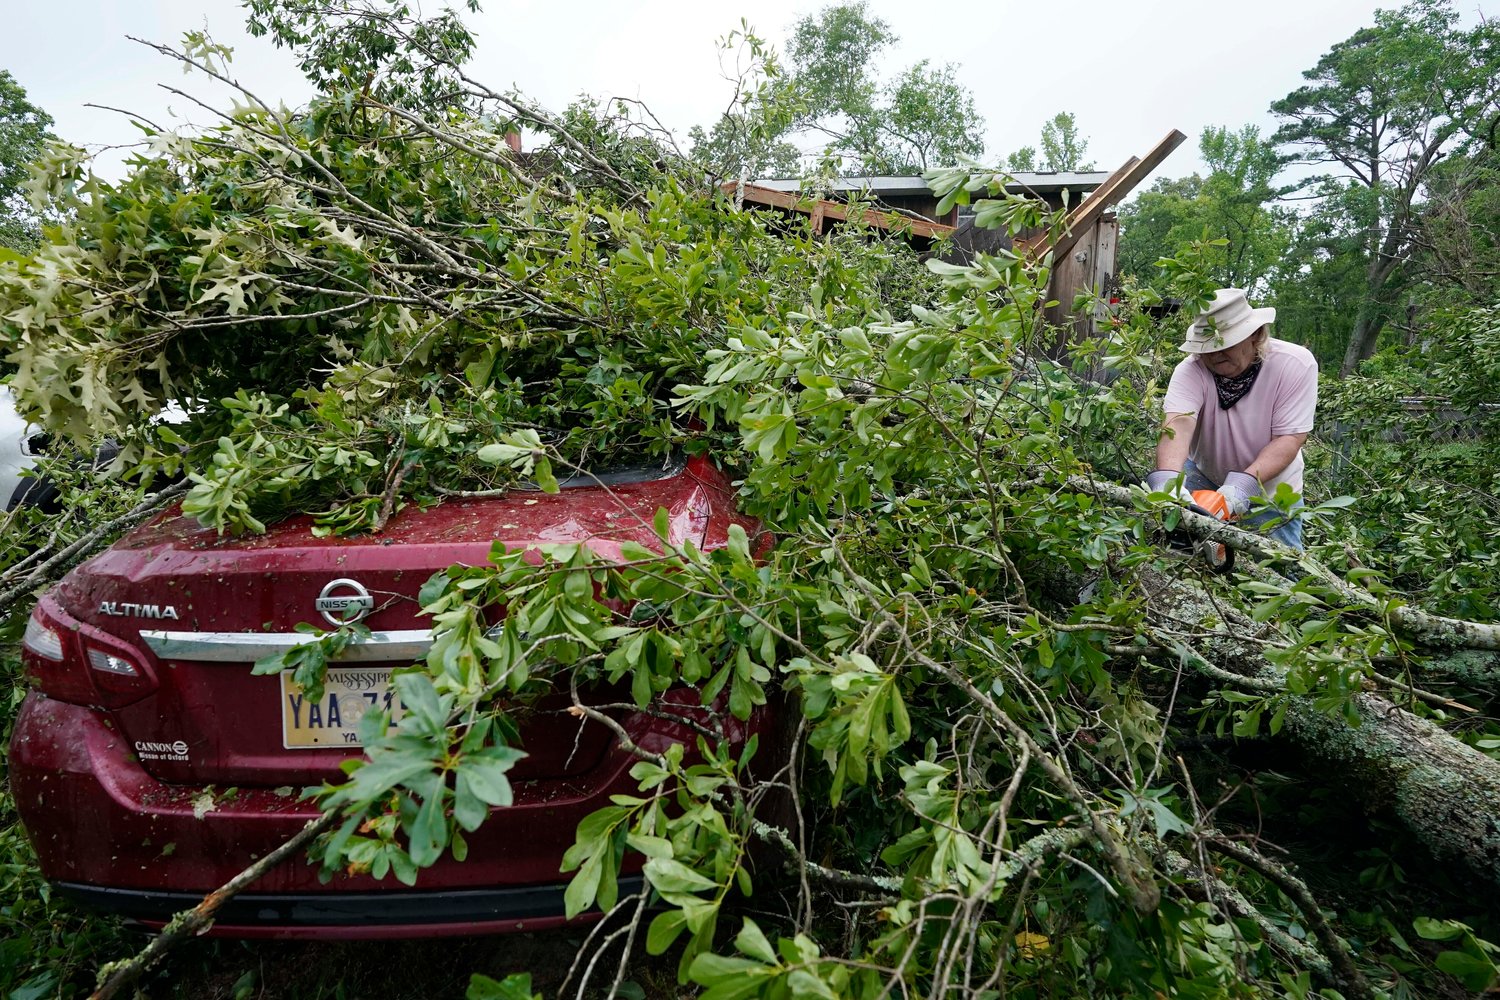 FILE - Span McGinty uses his chain saw to cut fallen tree limbs from a tornado-damaged vehicle at his brother's house in Yazoo County, Miss., on May 3, 2021. 90% of counties in the United States experienced a weather-related disaster between 2011-2021, according to a report published on Wednesday, Nov. 16, 2022. Over 300 million people ‚Äî 93% of the country‚Äôs population ‚Äî live in those counties. (AP Photo/Rogelio V. Solis, File)